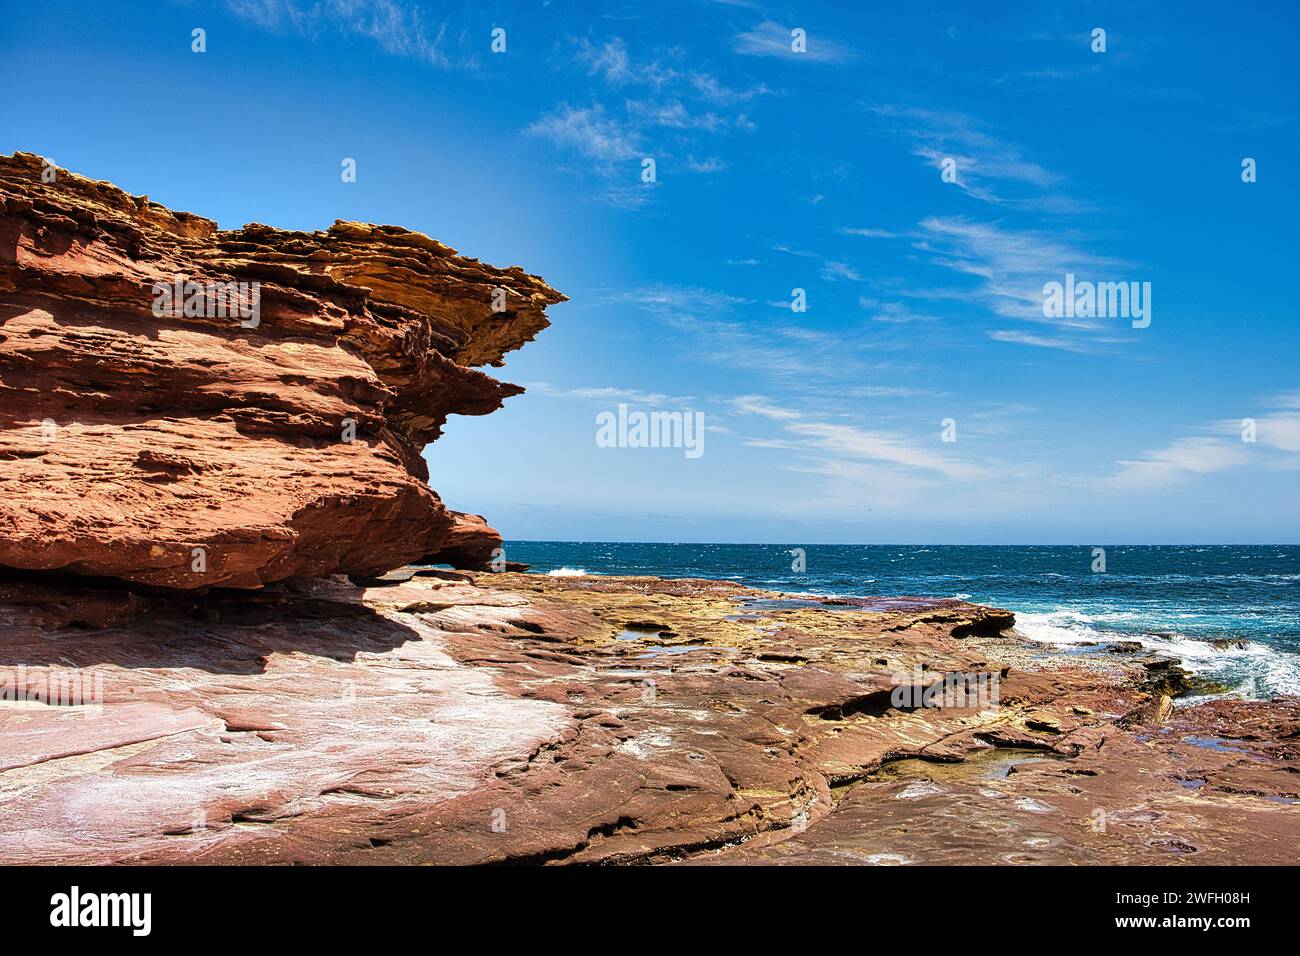 Heavily eroded red-brown sandstone cliffs and rock plateau with rock pools at the coast of Kalbarri National Park, Western Australia. Stock Photo